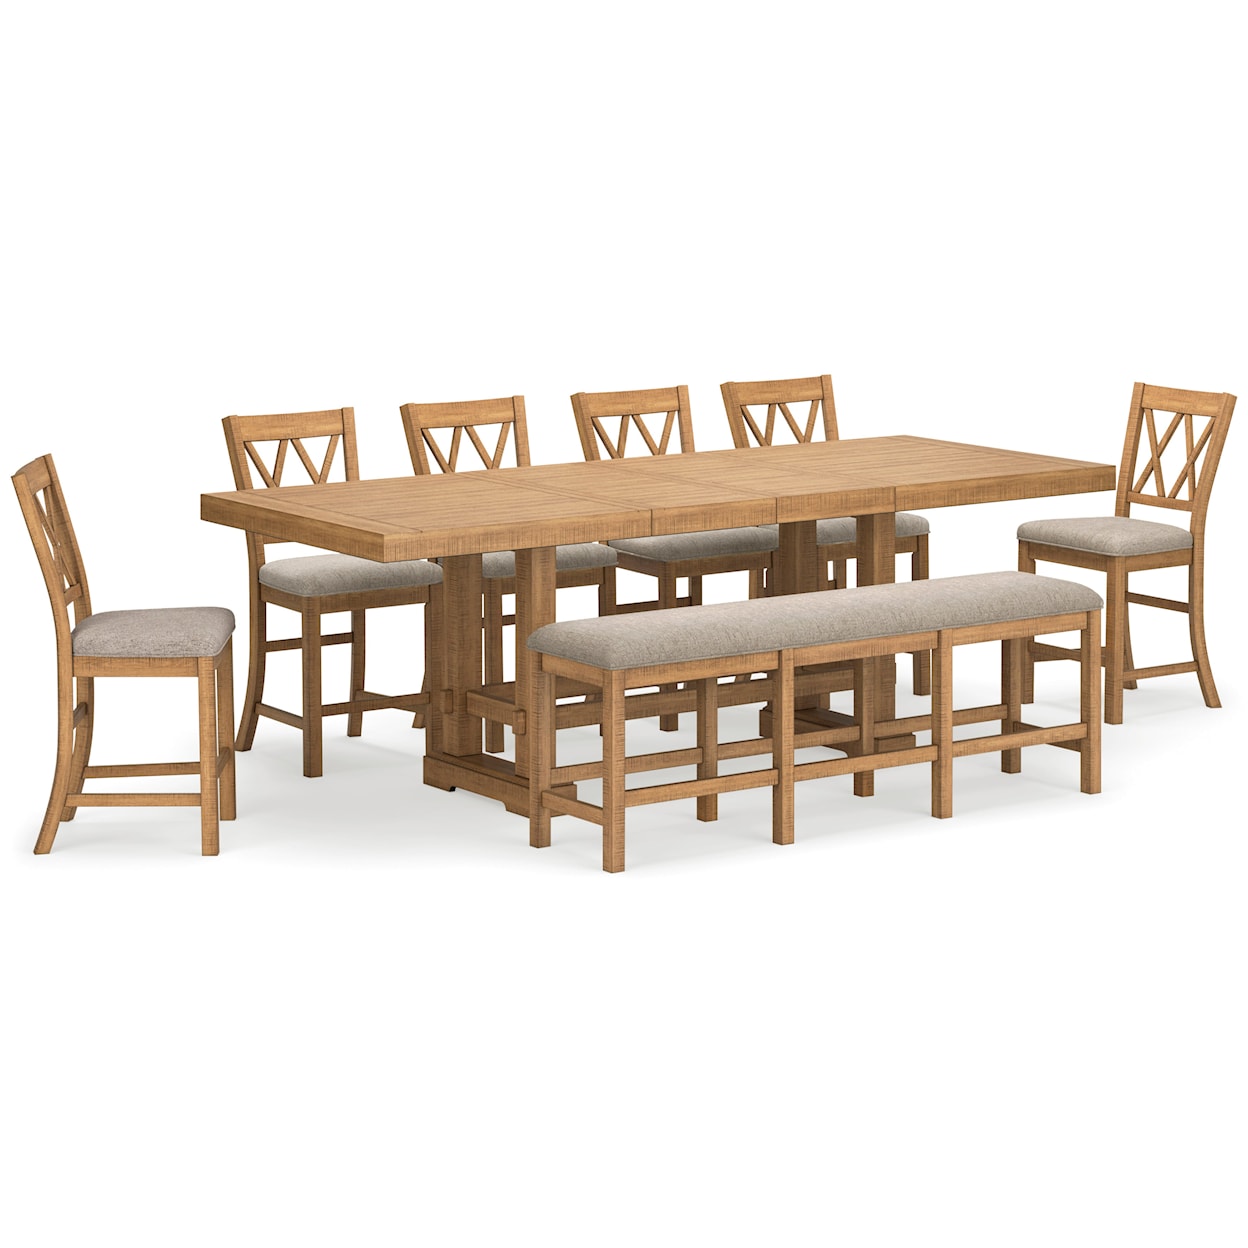 Signature Design by Ashley Furniture Havonplane 8-Piece Counter Dining Set with Bench